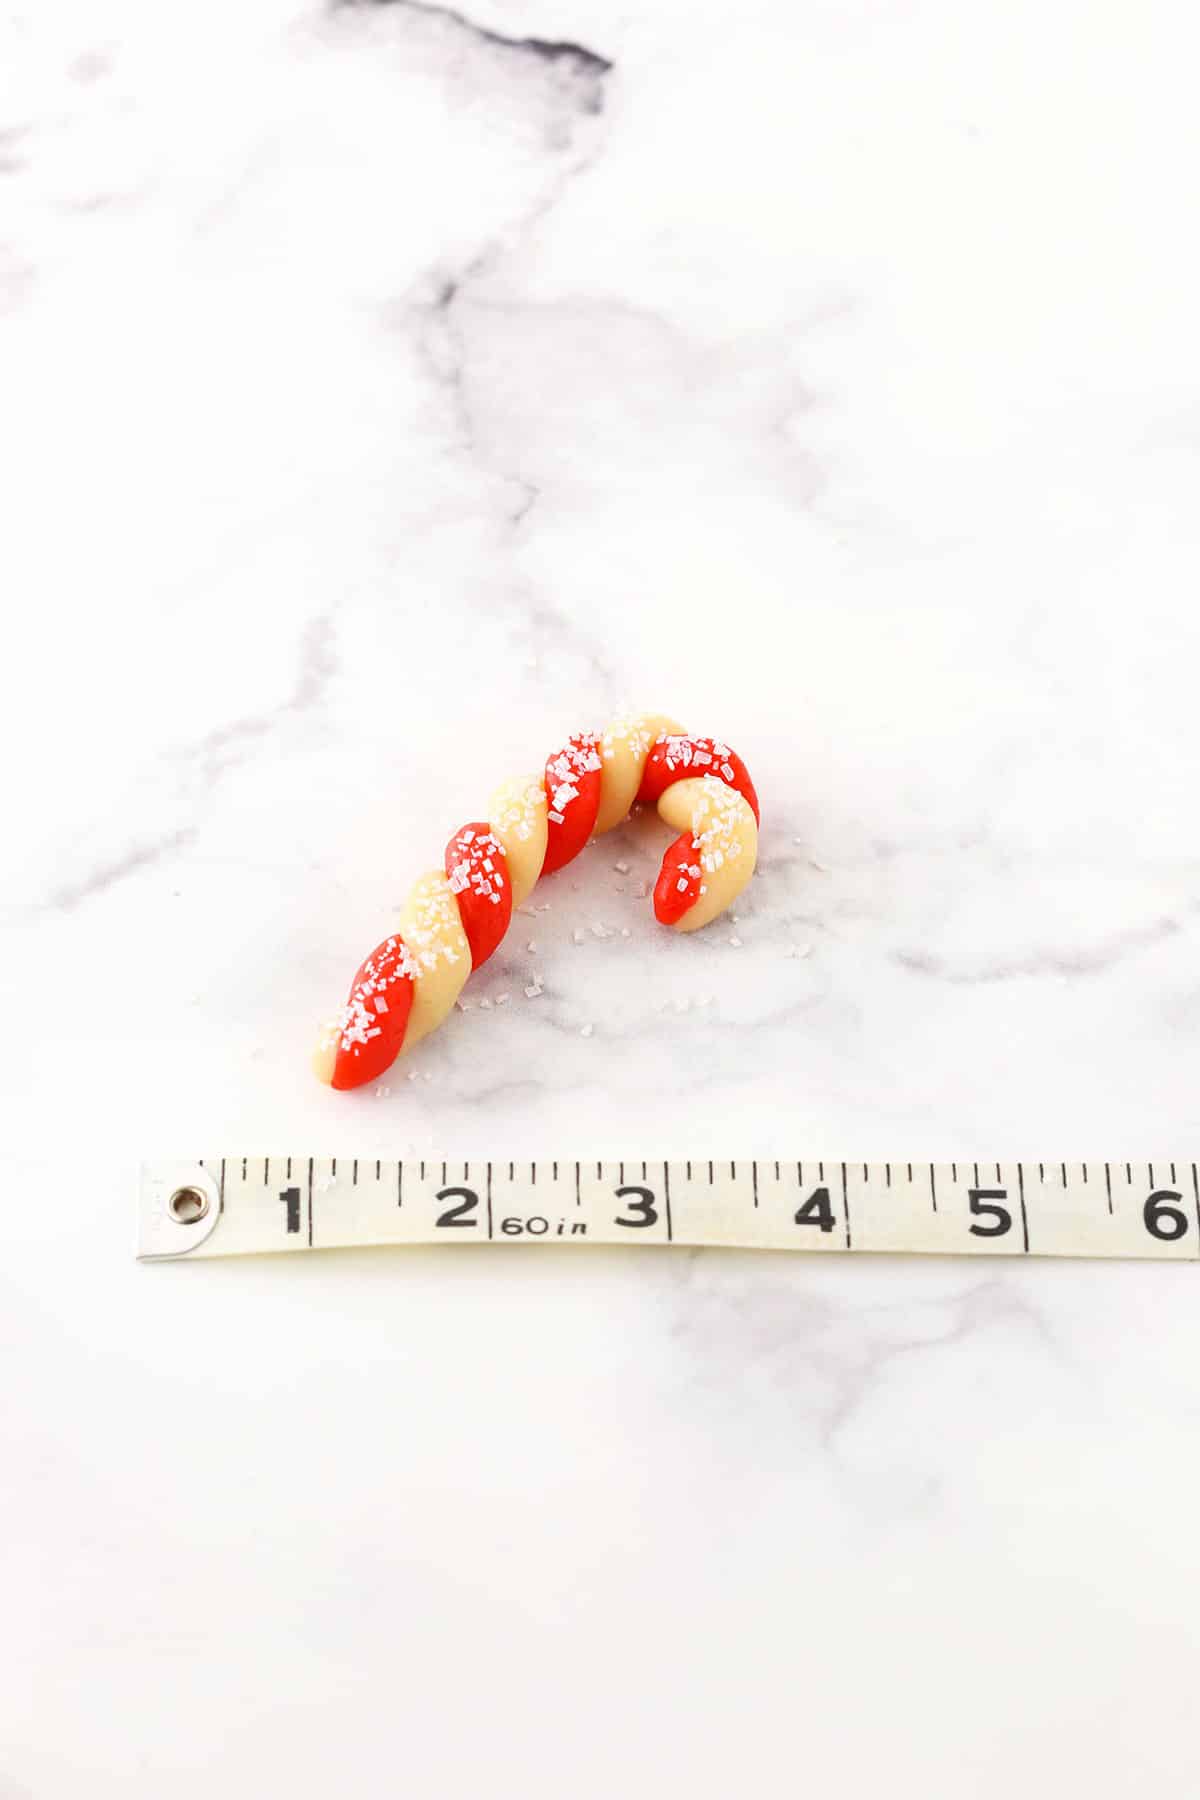 Red and white Candy Cane Cookie next to a tape measure showing the scale and size